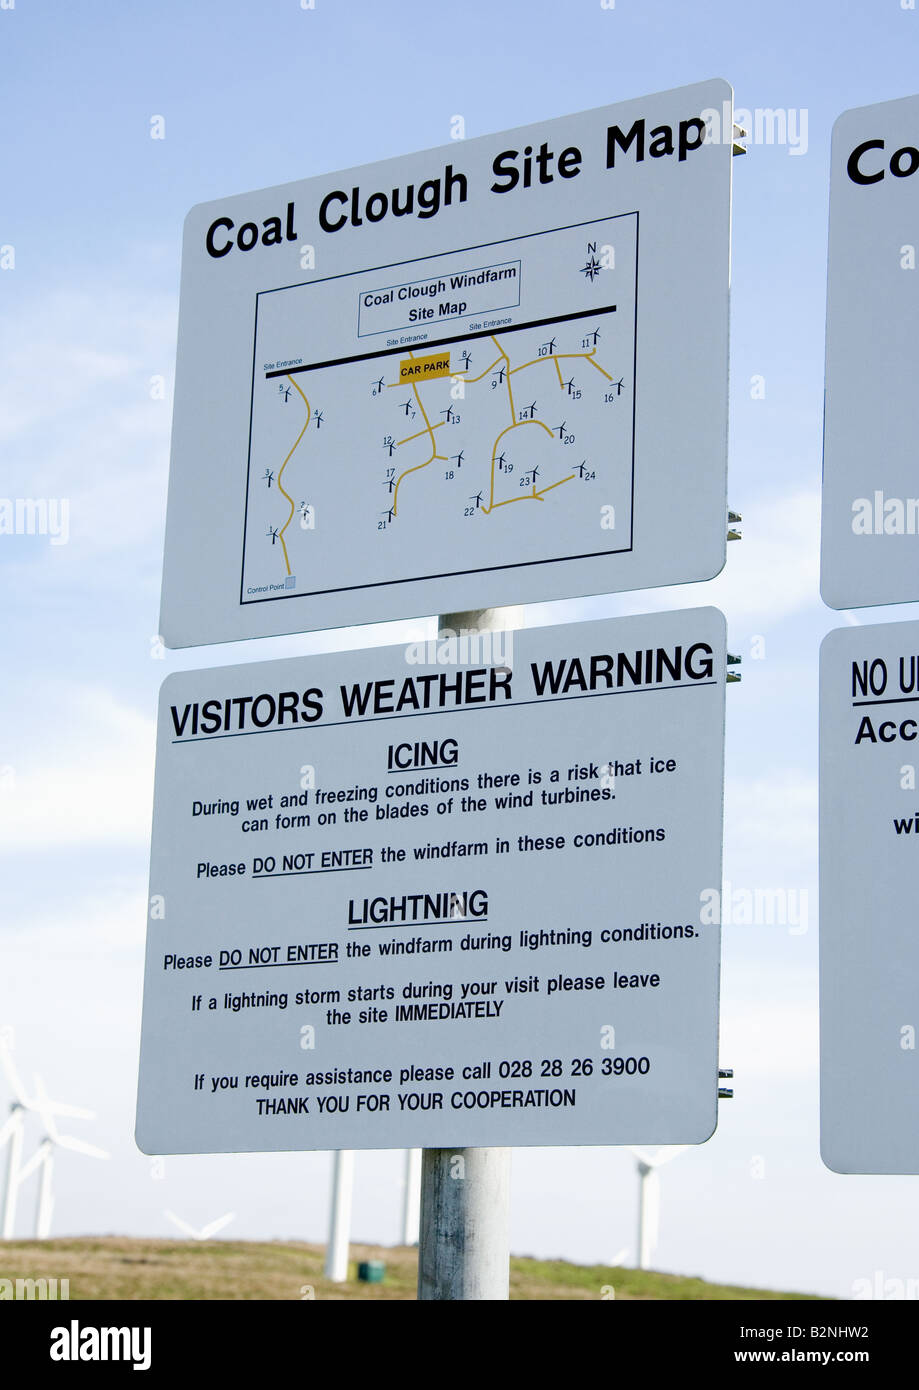 Site map and signage at the site entrance to Coal Clough Windfarm, Cliviger, Near Burnley, Lancashire, England, UK. Stock Photo